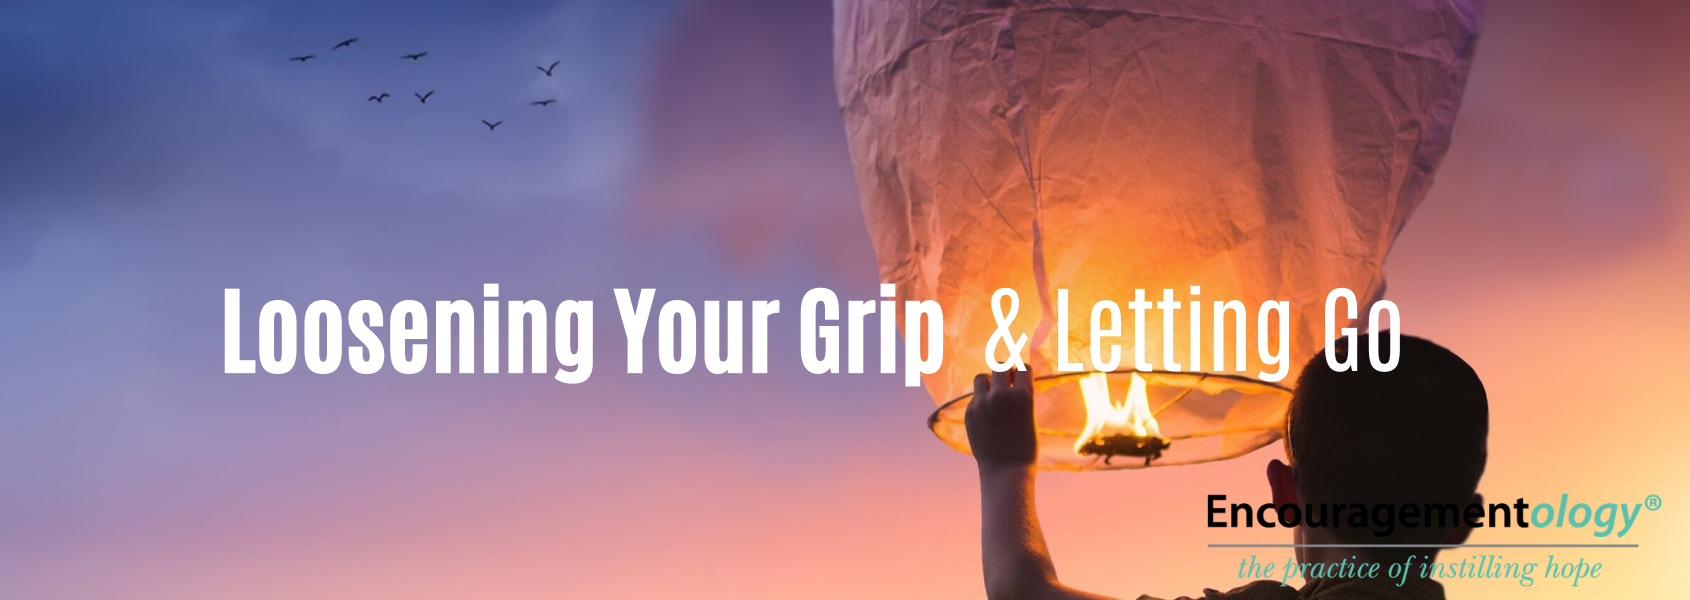 Loosening Your Grip & Letting Go